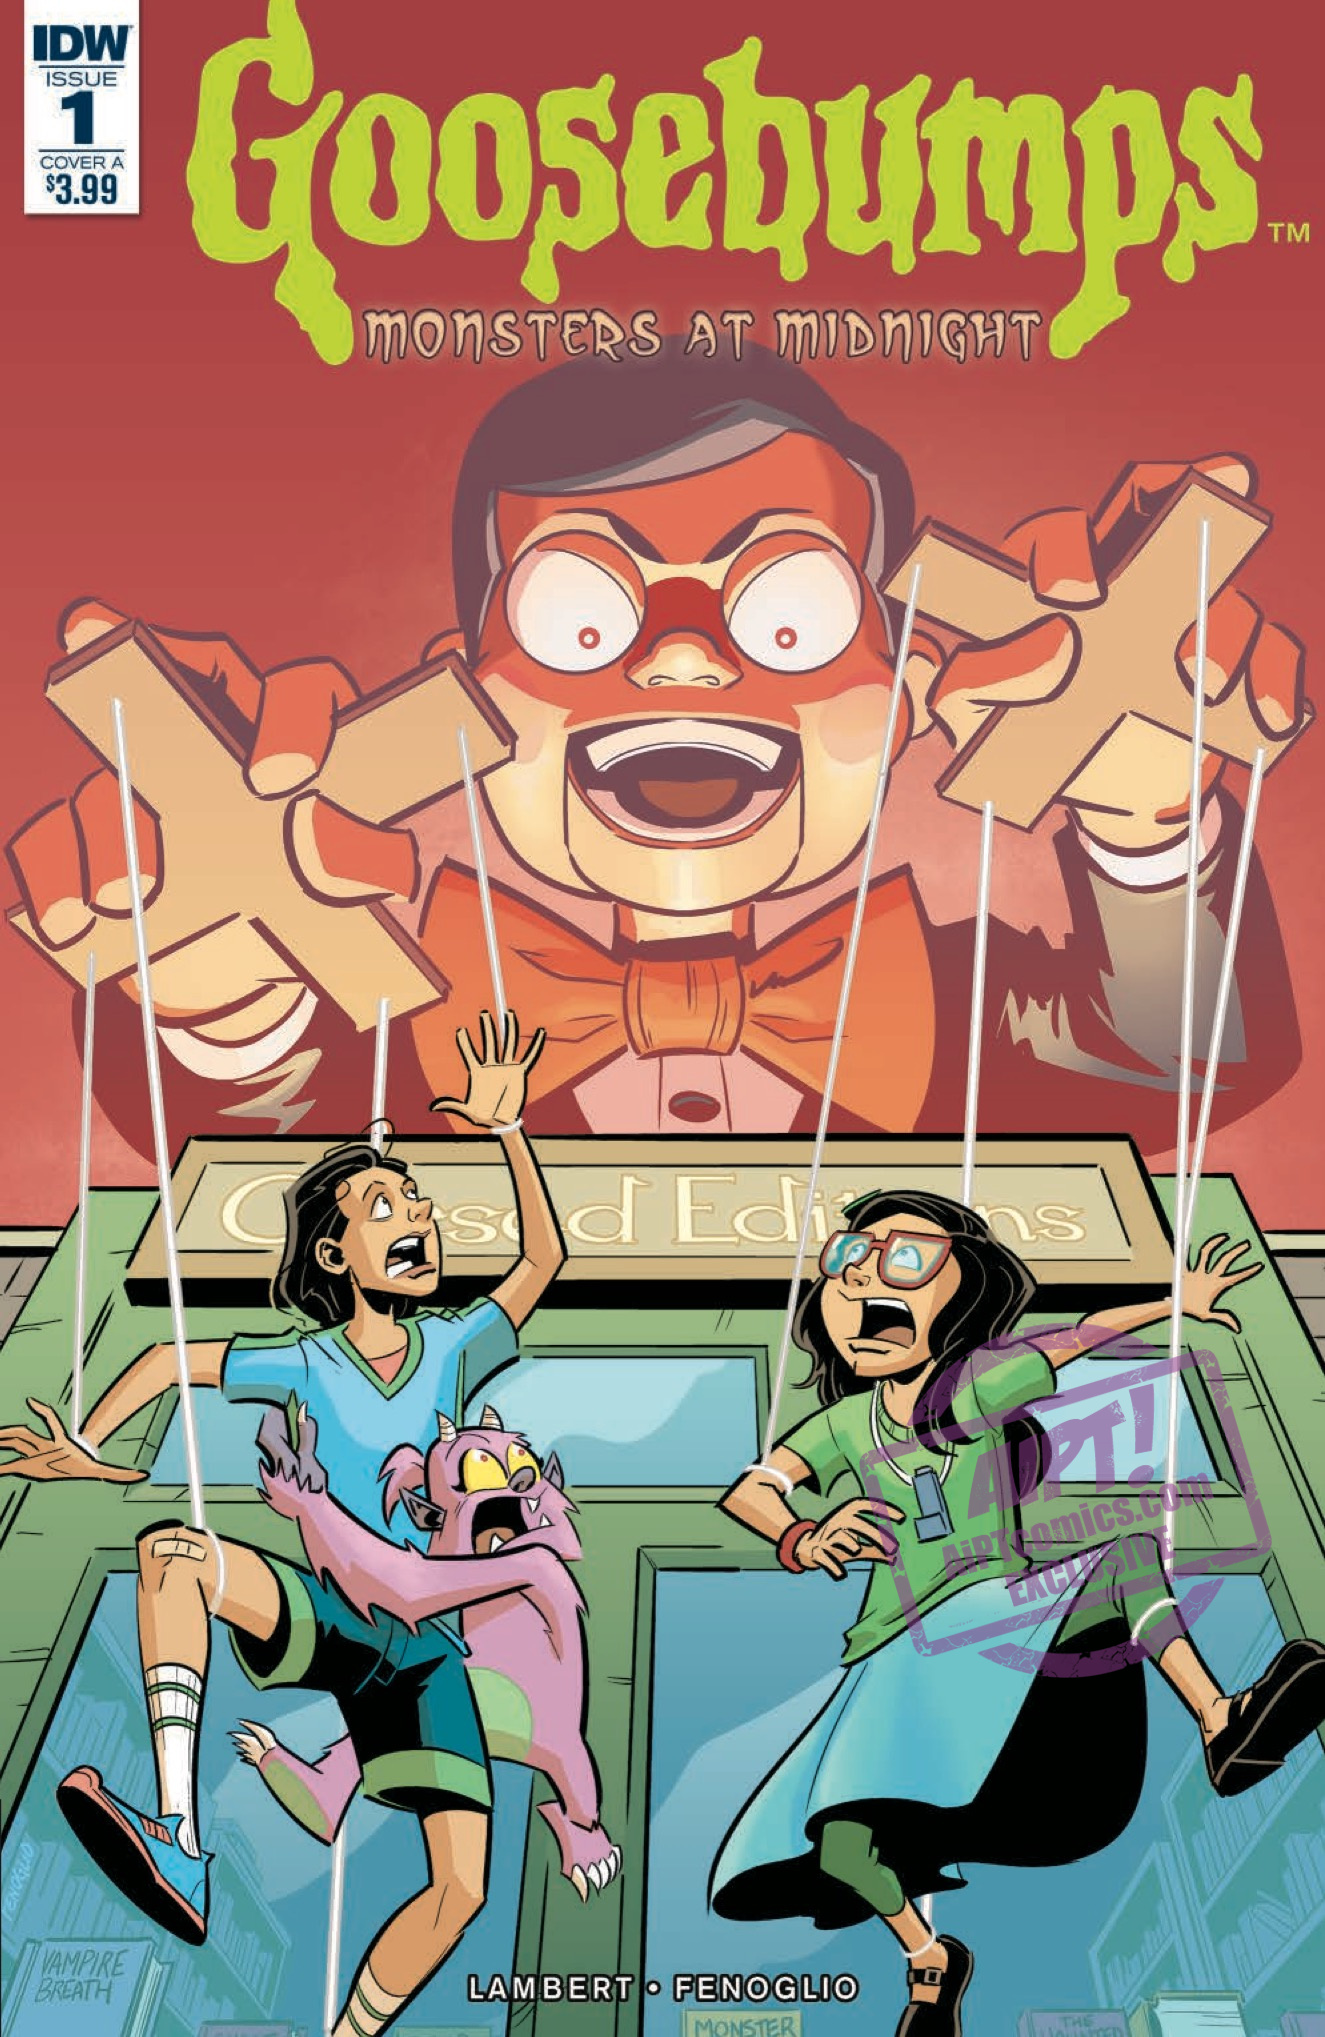 [EXCLUSIVE] IDW Preview: Goosebumps: Monsters at Midnight #1